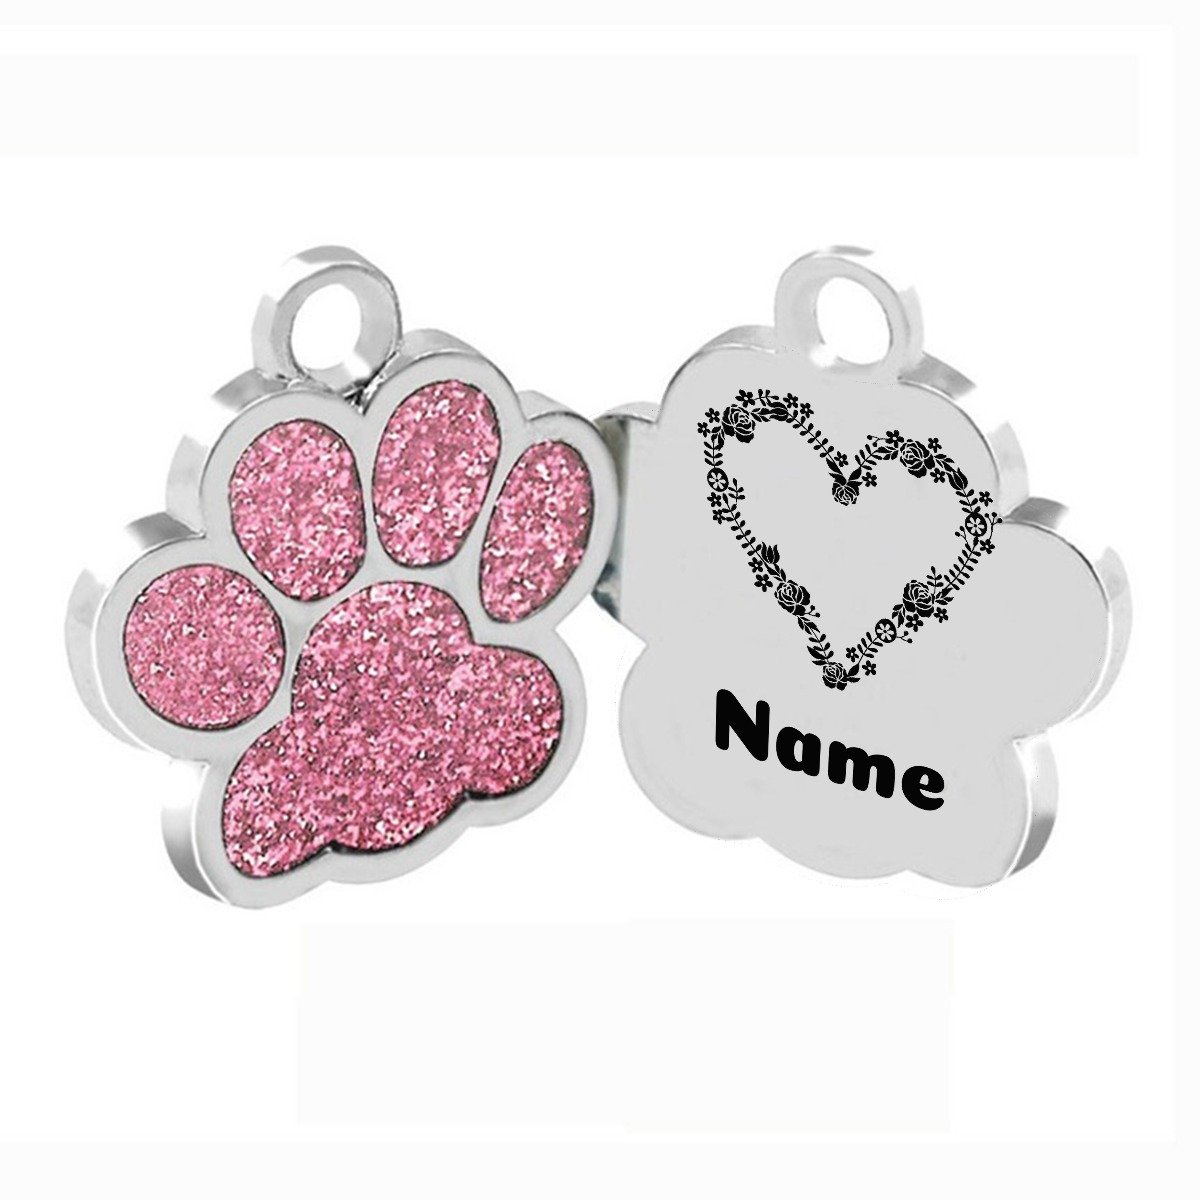 Personalized Pet Tag - Omtheo Gifts